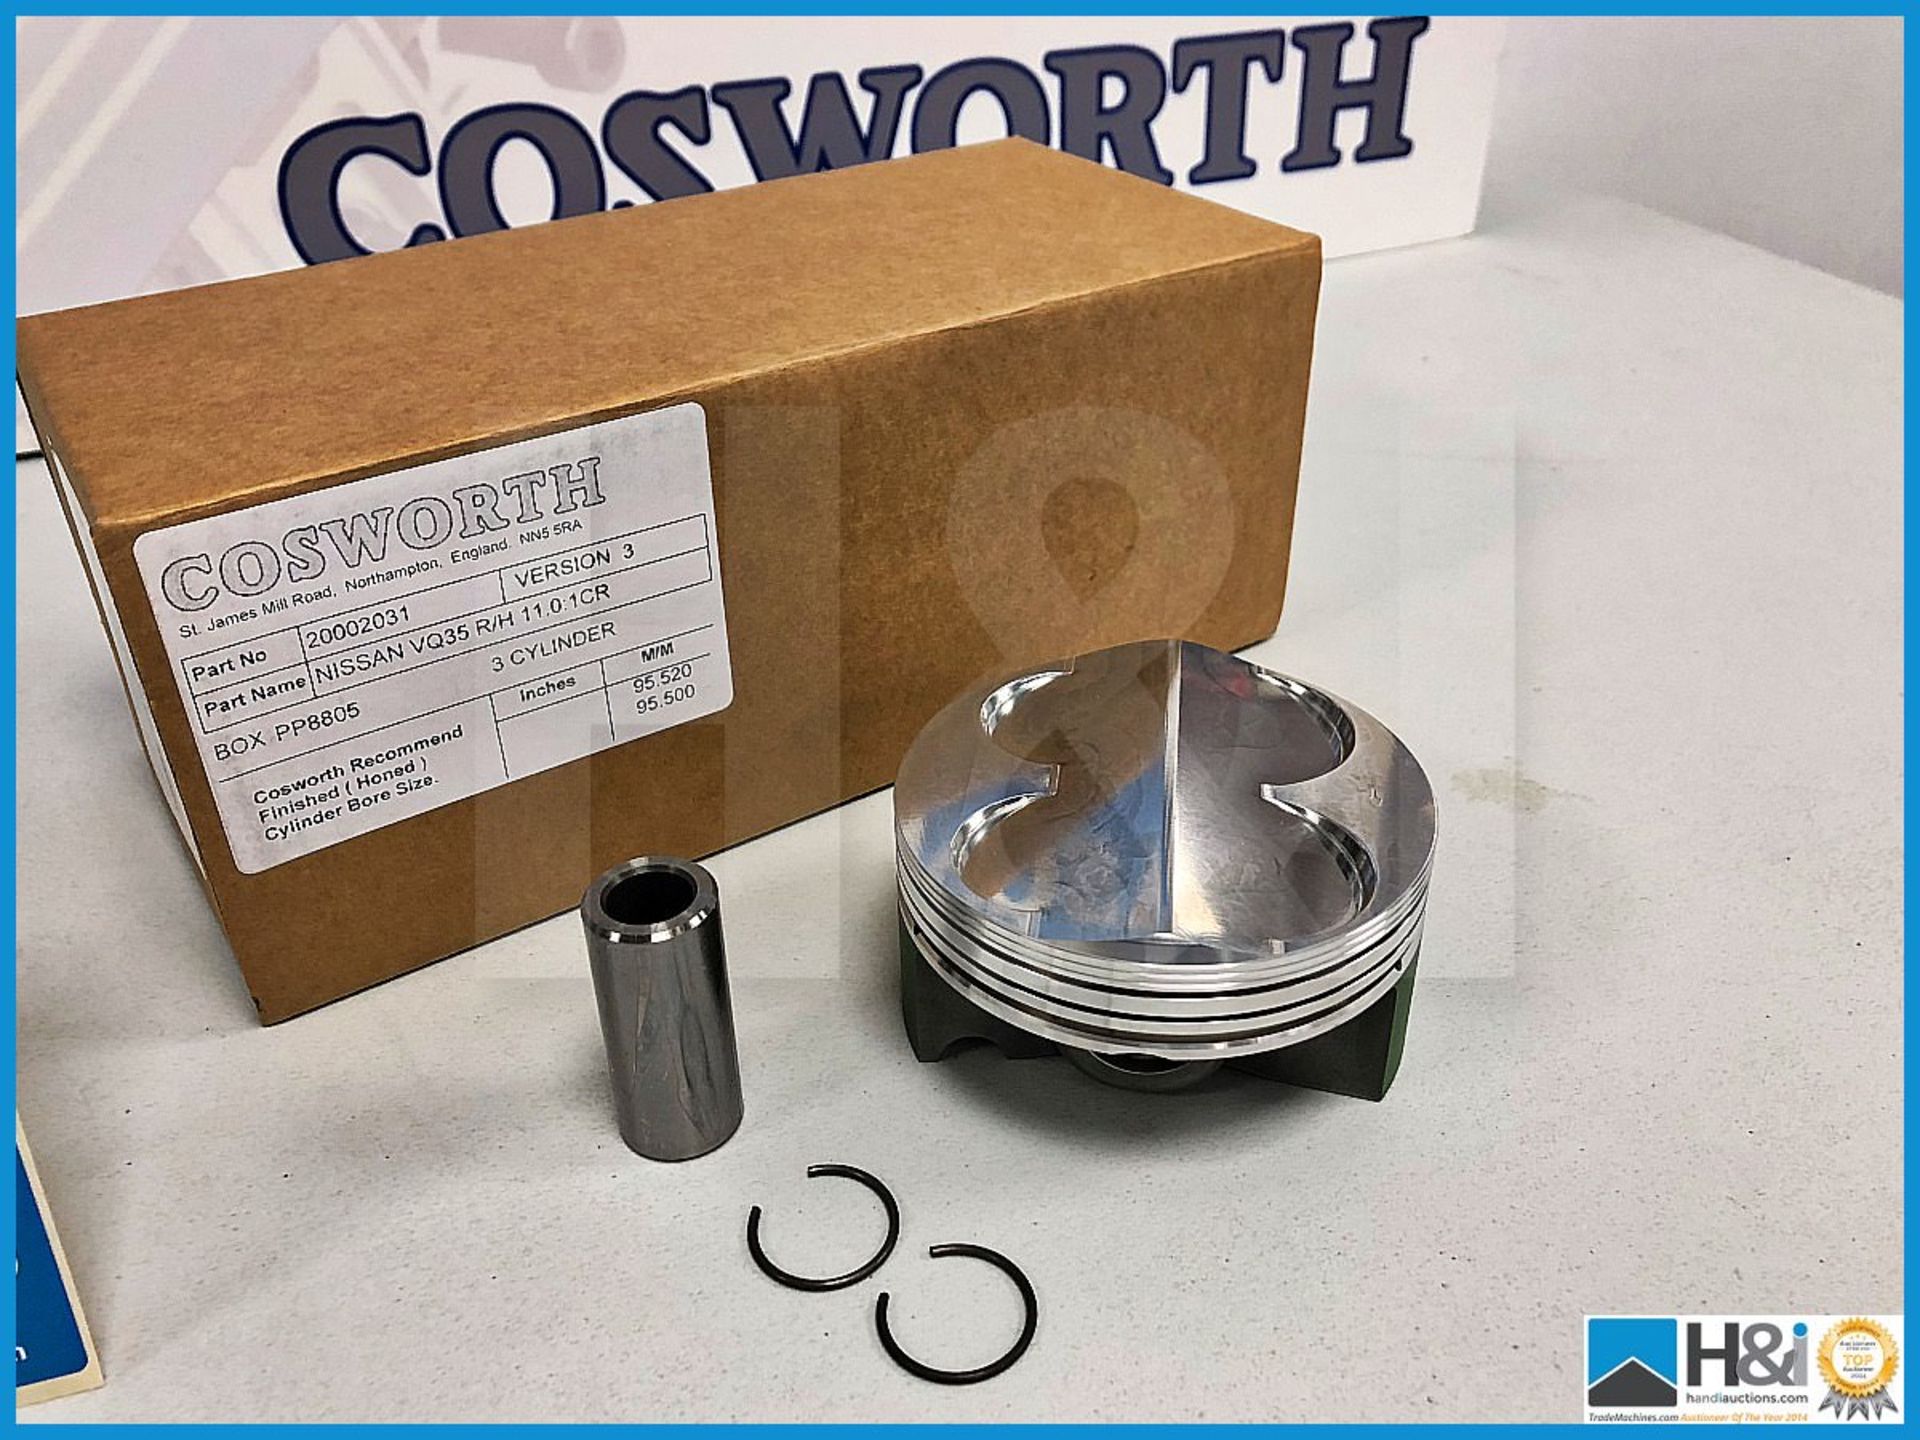 19 x Cosworth Nissan VQ35 piston, pin and clip kits. Approx RRP GBP 2,800 - Image 2 of 3